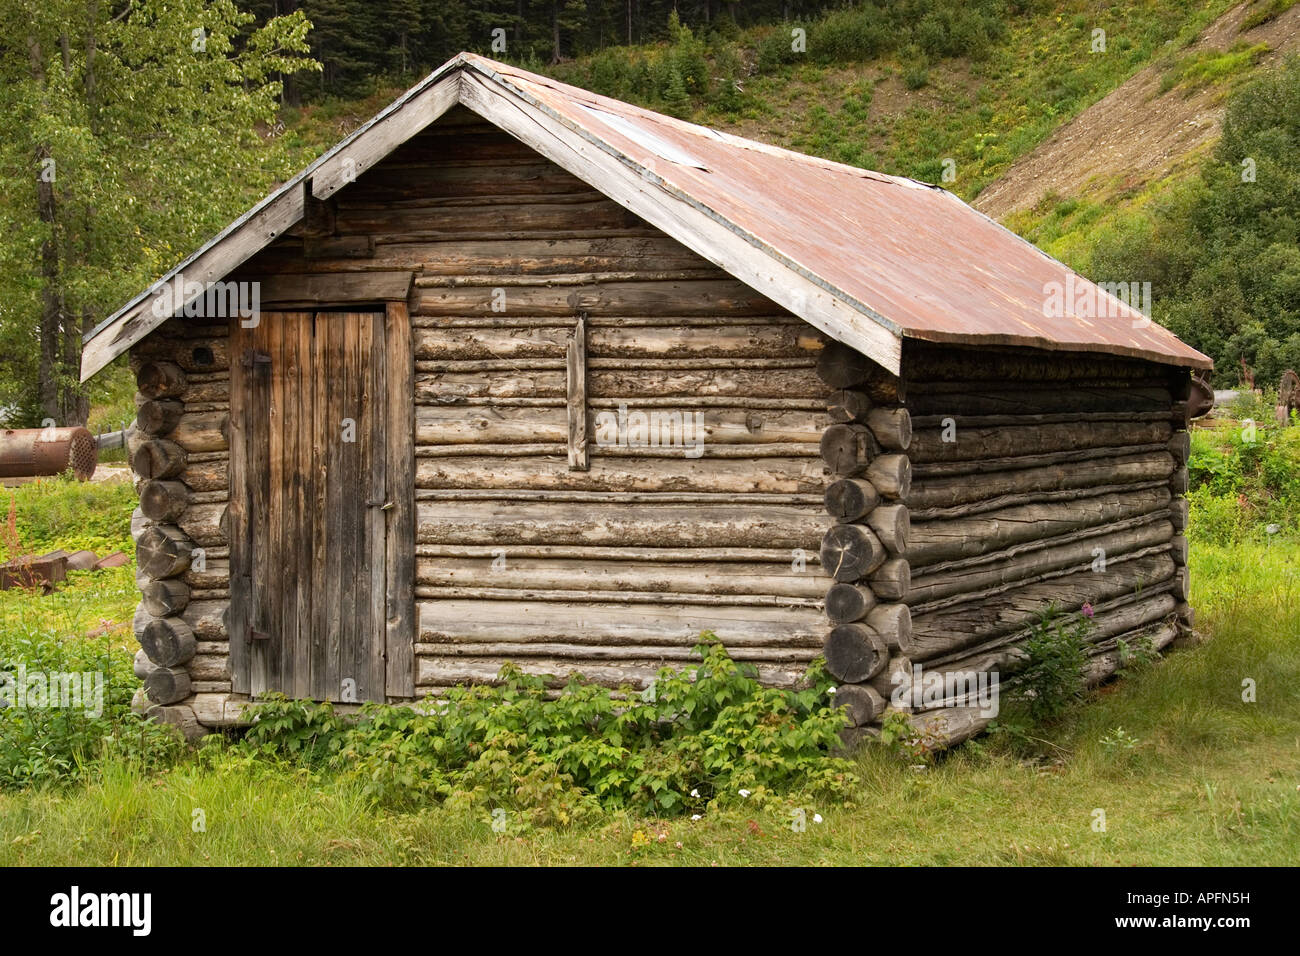 Log cabin, Barkerville historic ghost town, near Quesnel, British Columbia, Canada Stock Photo